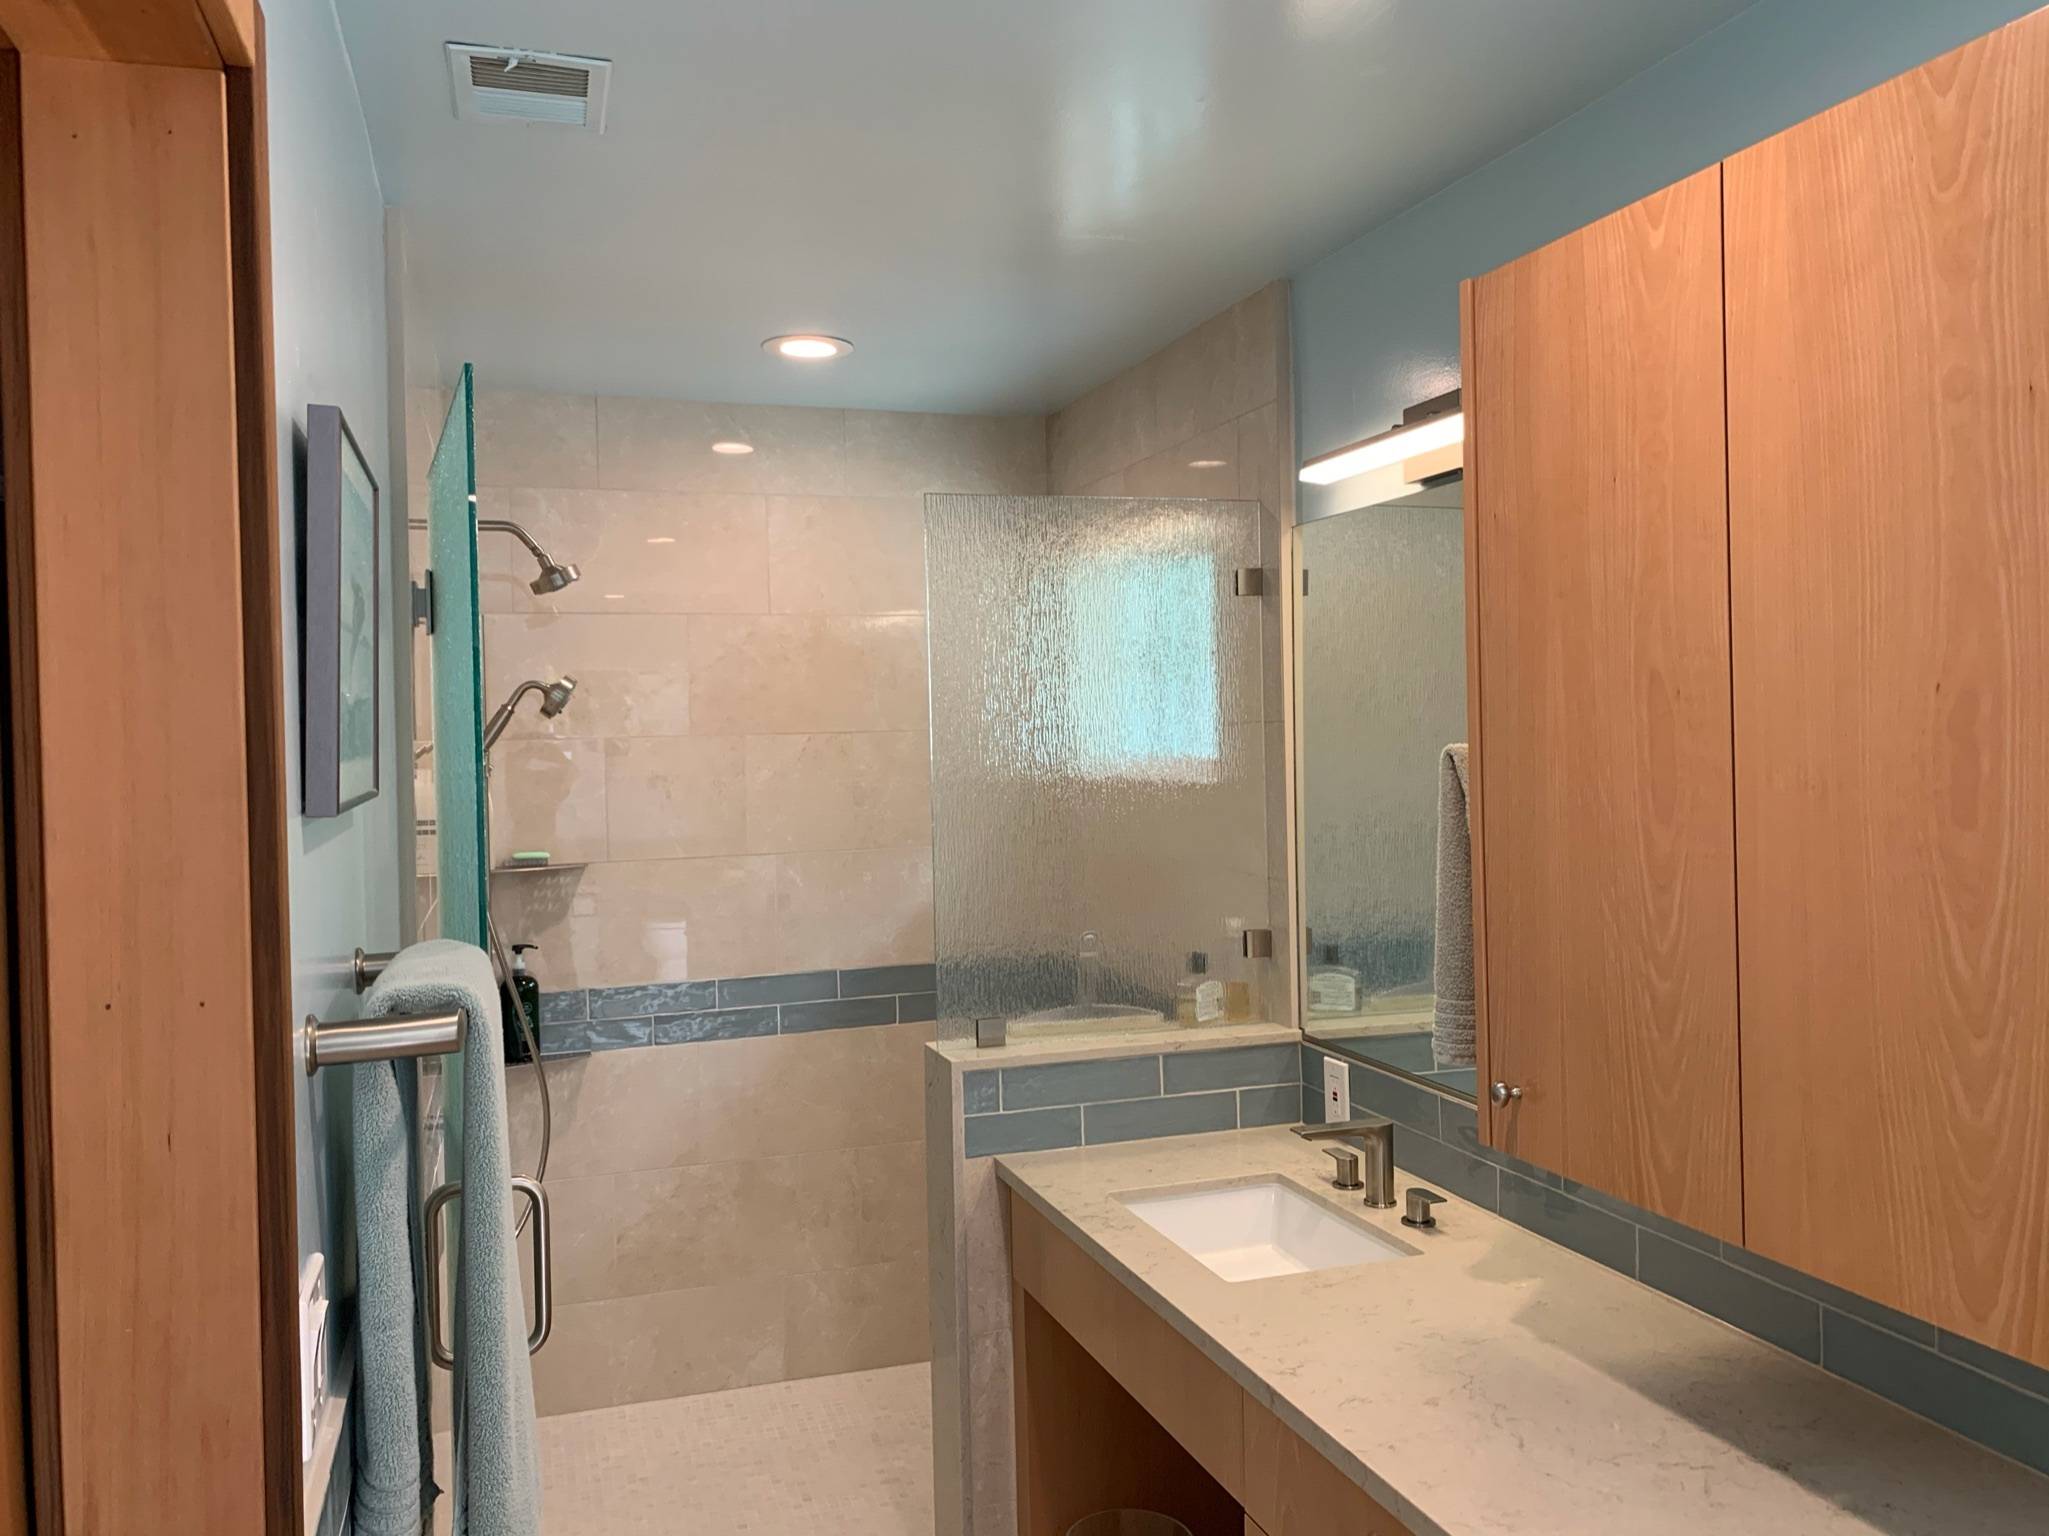 This curbless shower has mosaic floor tile. The wall tiles have a marble look with a reflective, polished finish, and there is a decorative strip.